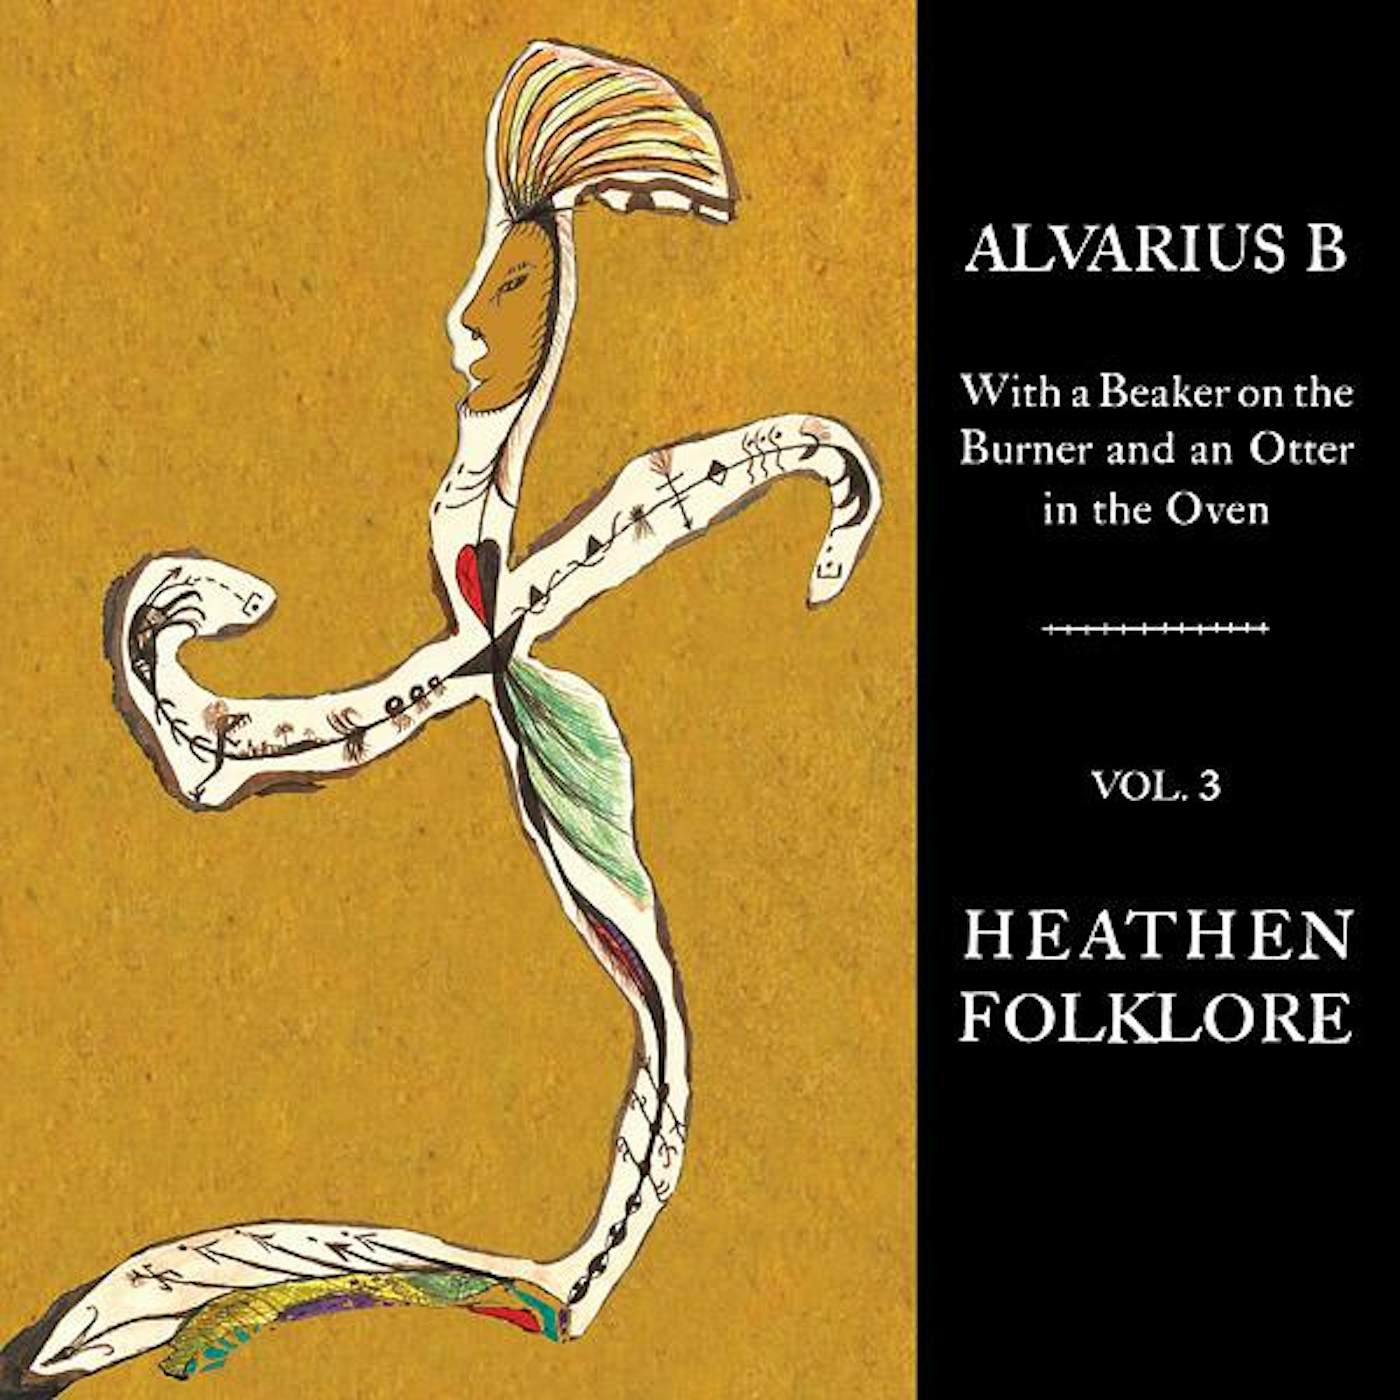 Alvarius B. 'With a Beaker on the Burner and an Otter in the Oven - Vol. 3 Heathen Folklore' Vinyl LP Vinyl Record